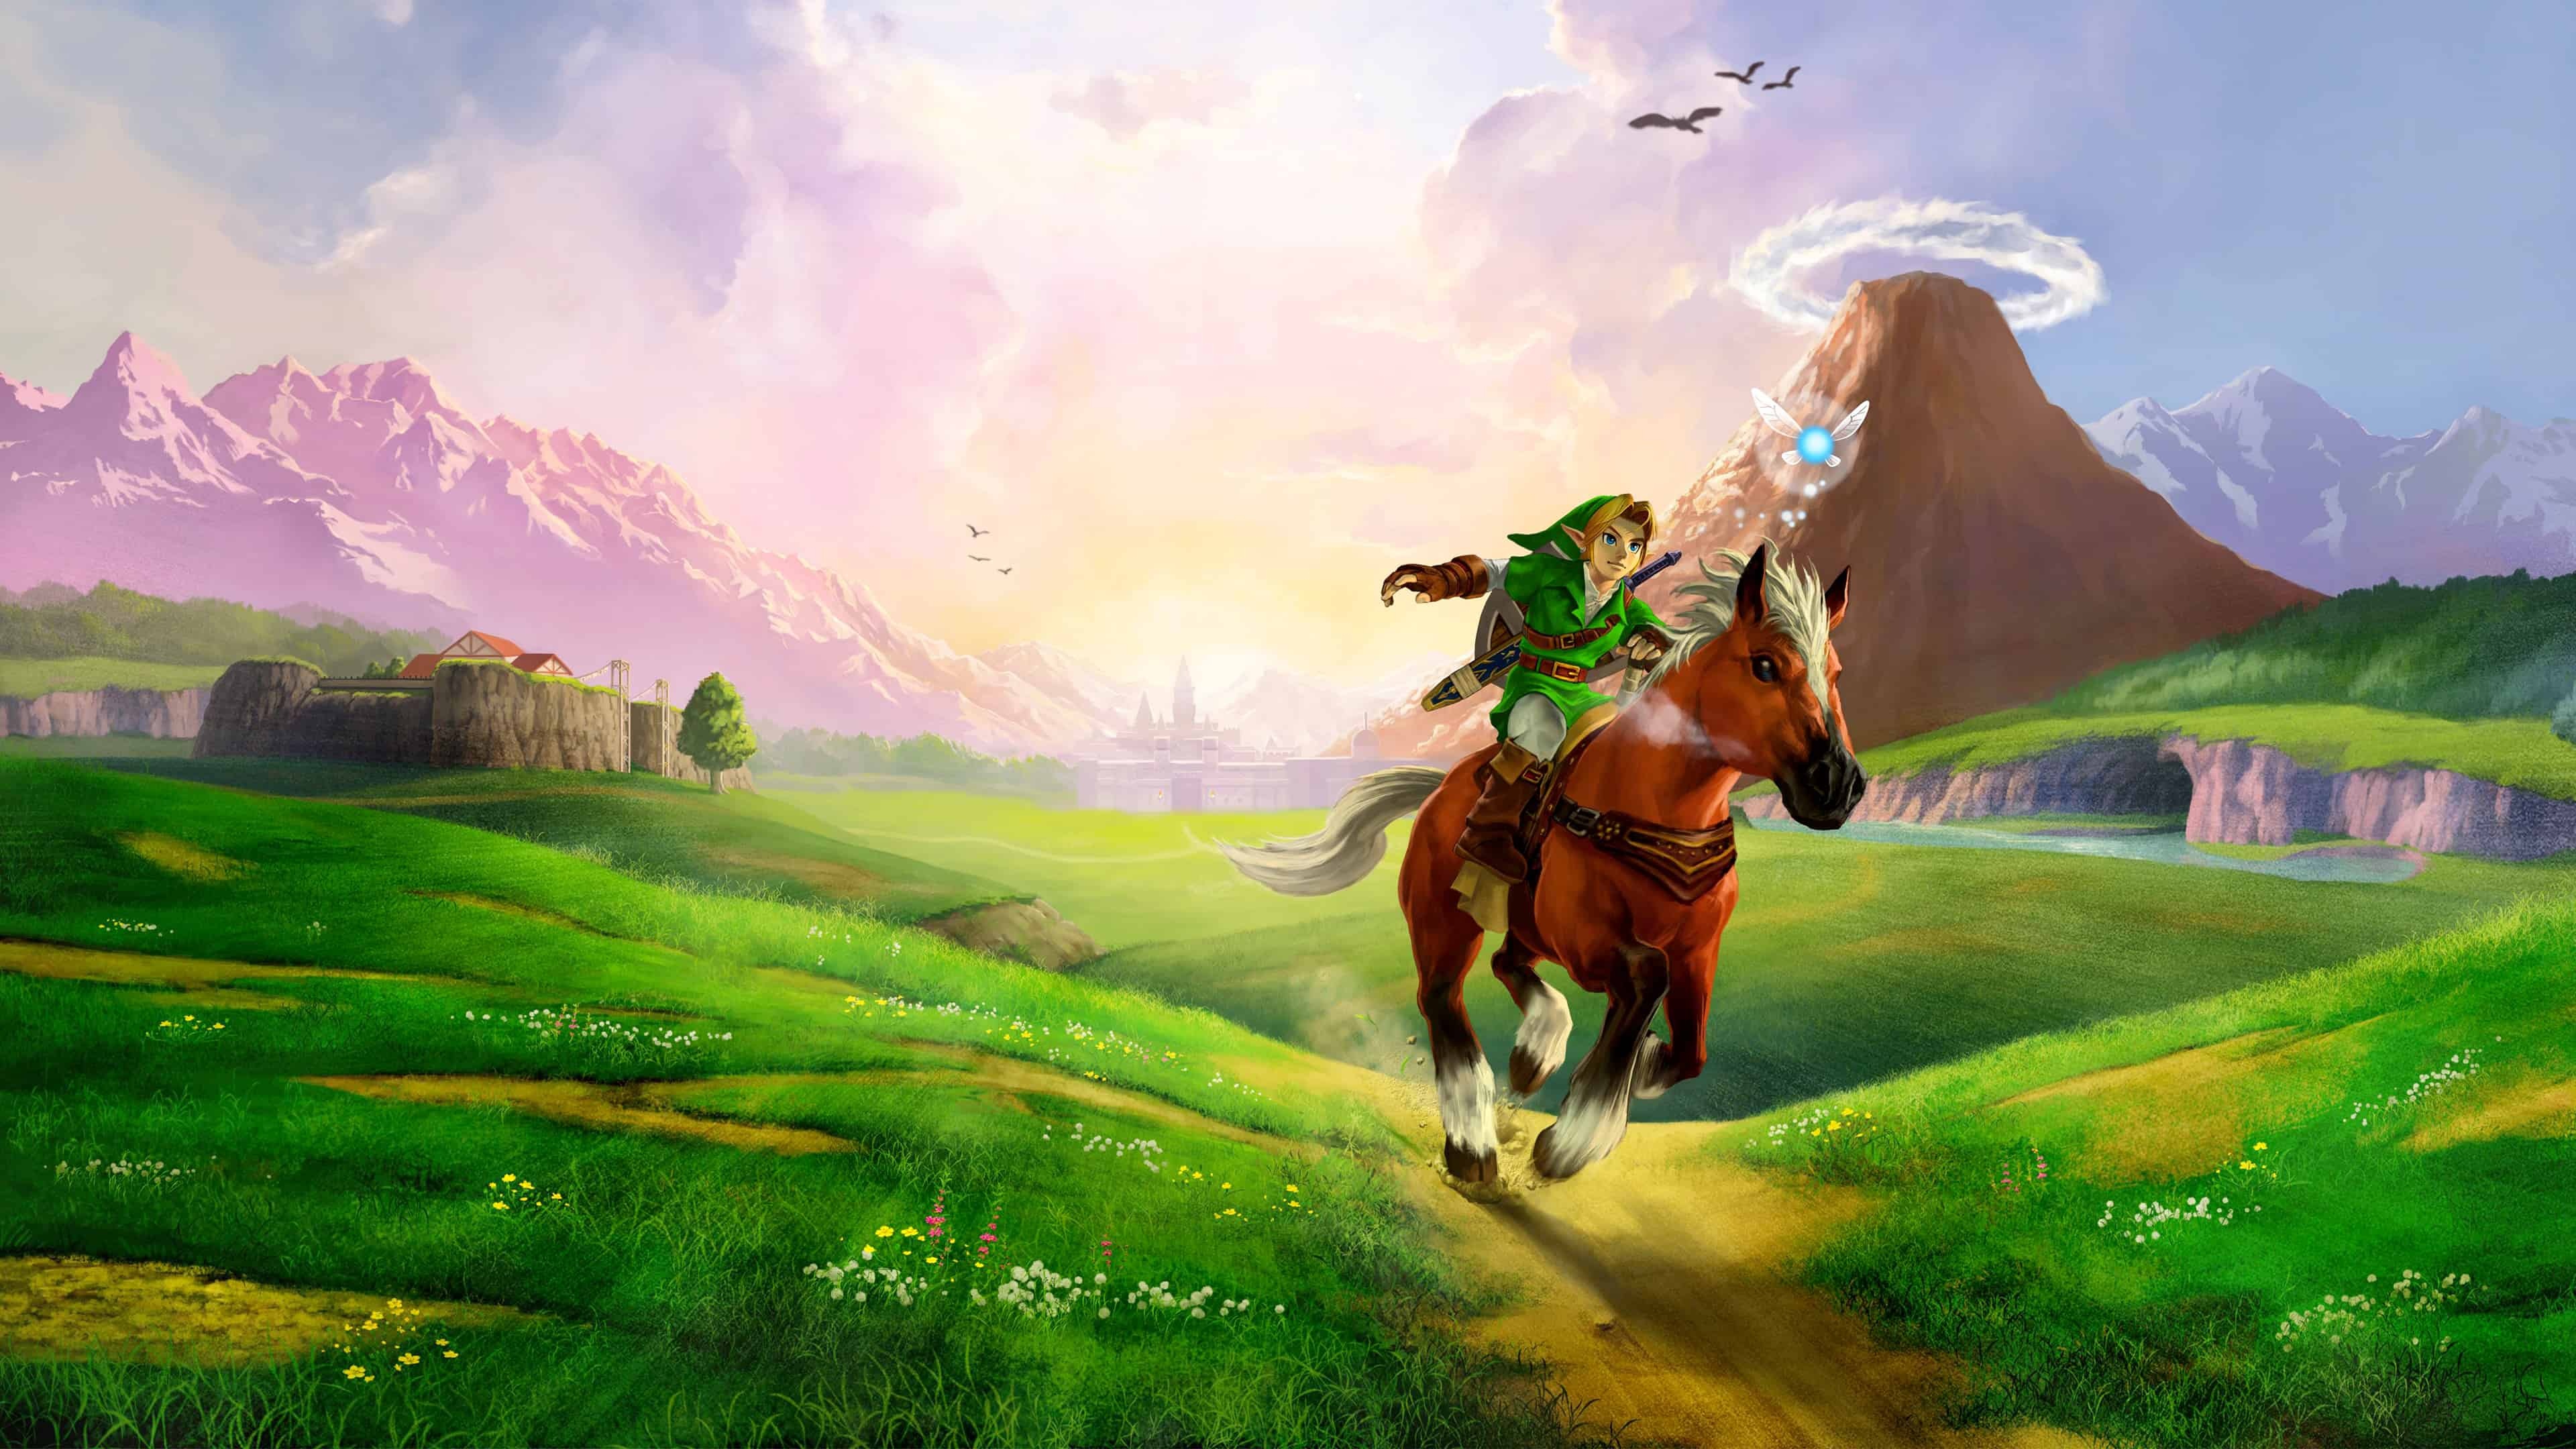 Dual monitor wallpapers, Link's journey, Immersive world, Iconic characters, 3840x2160 4K Desktop